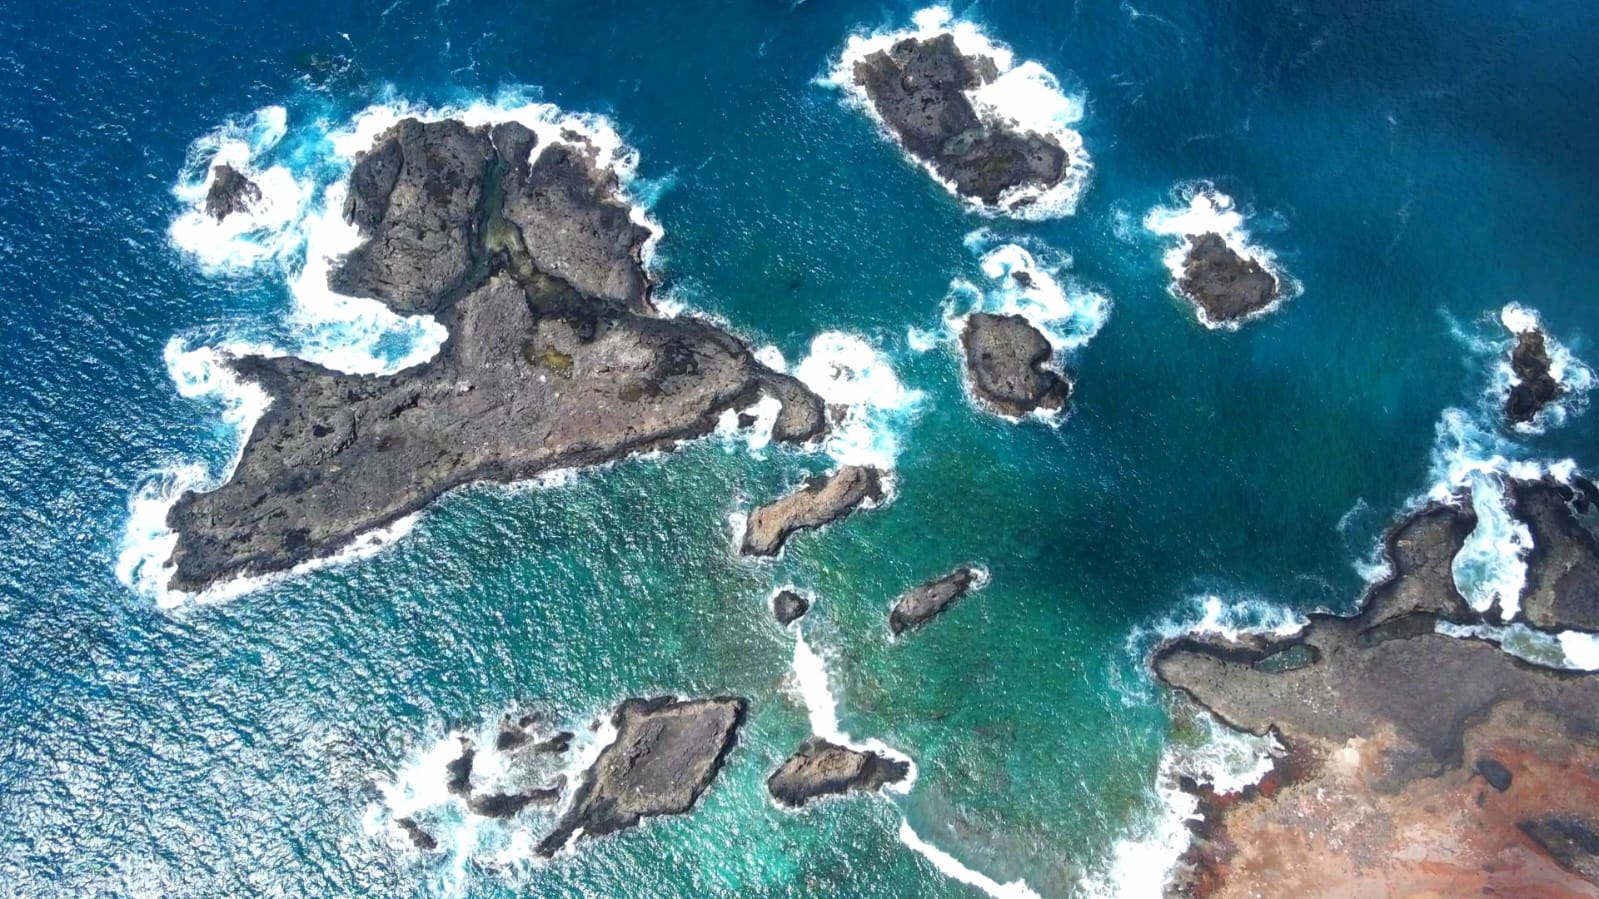 The plastic-forming rocks are found on the island of Trinidad